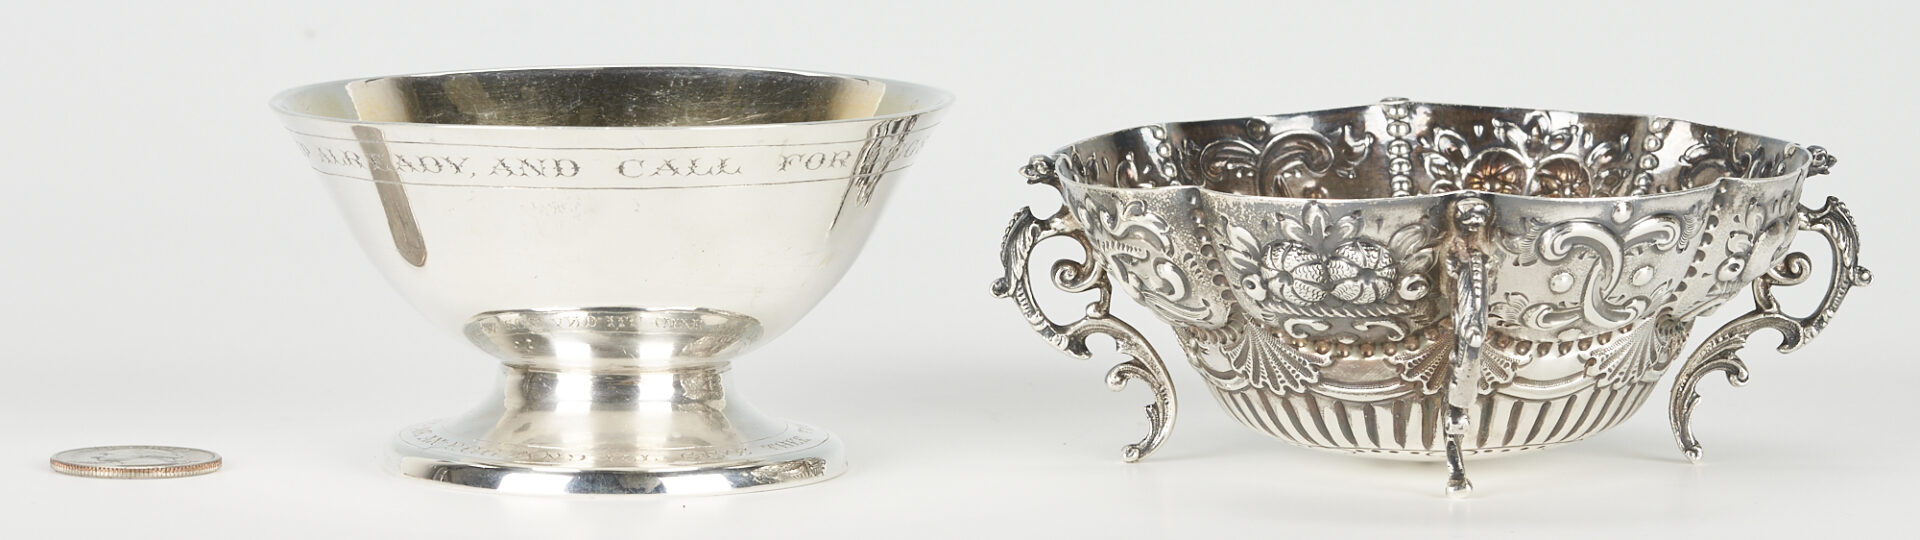 Lot 730: Two English Sterling Bowls, incl. William Shakespeare Related